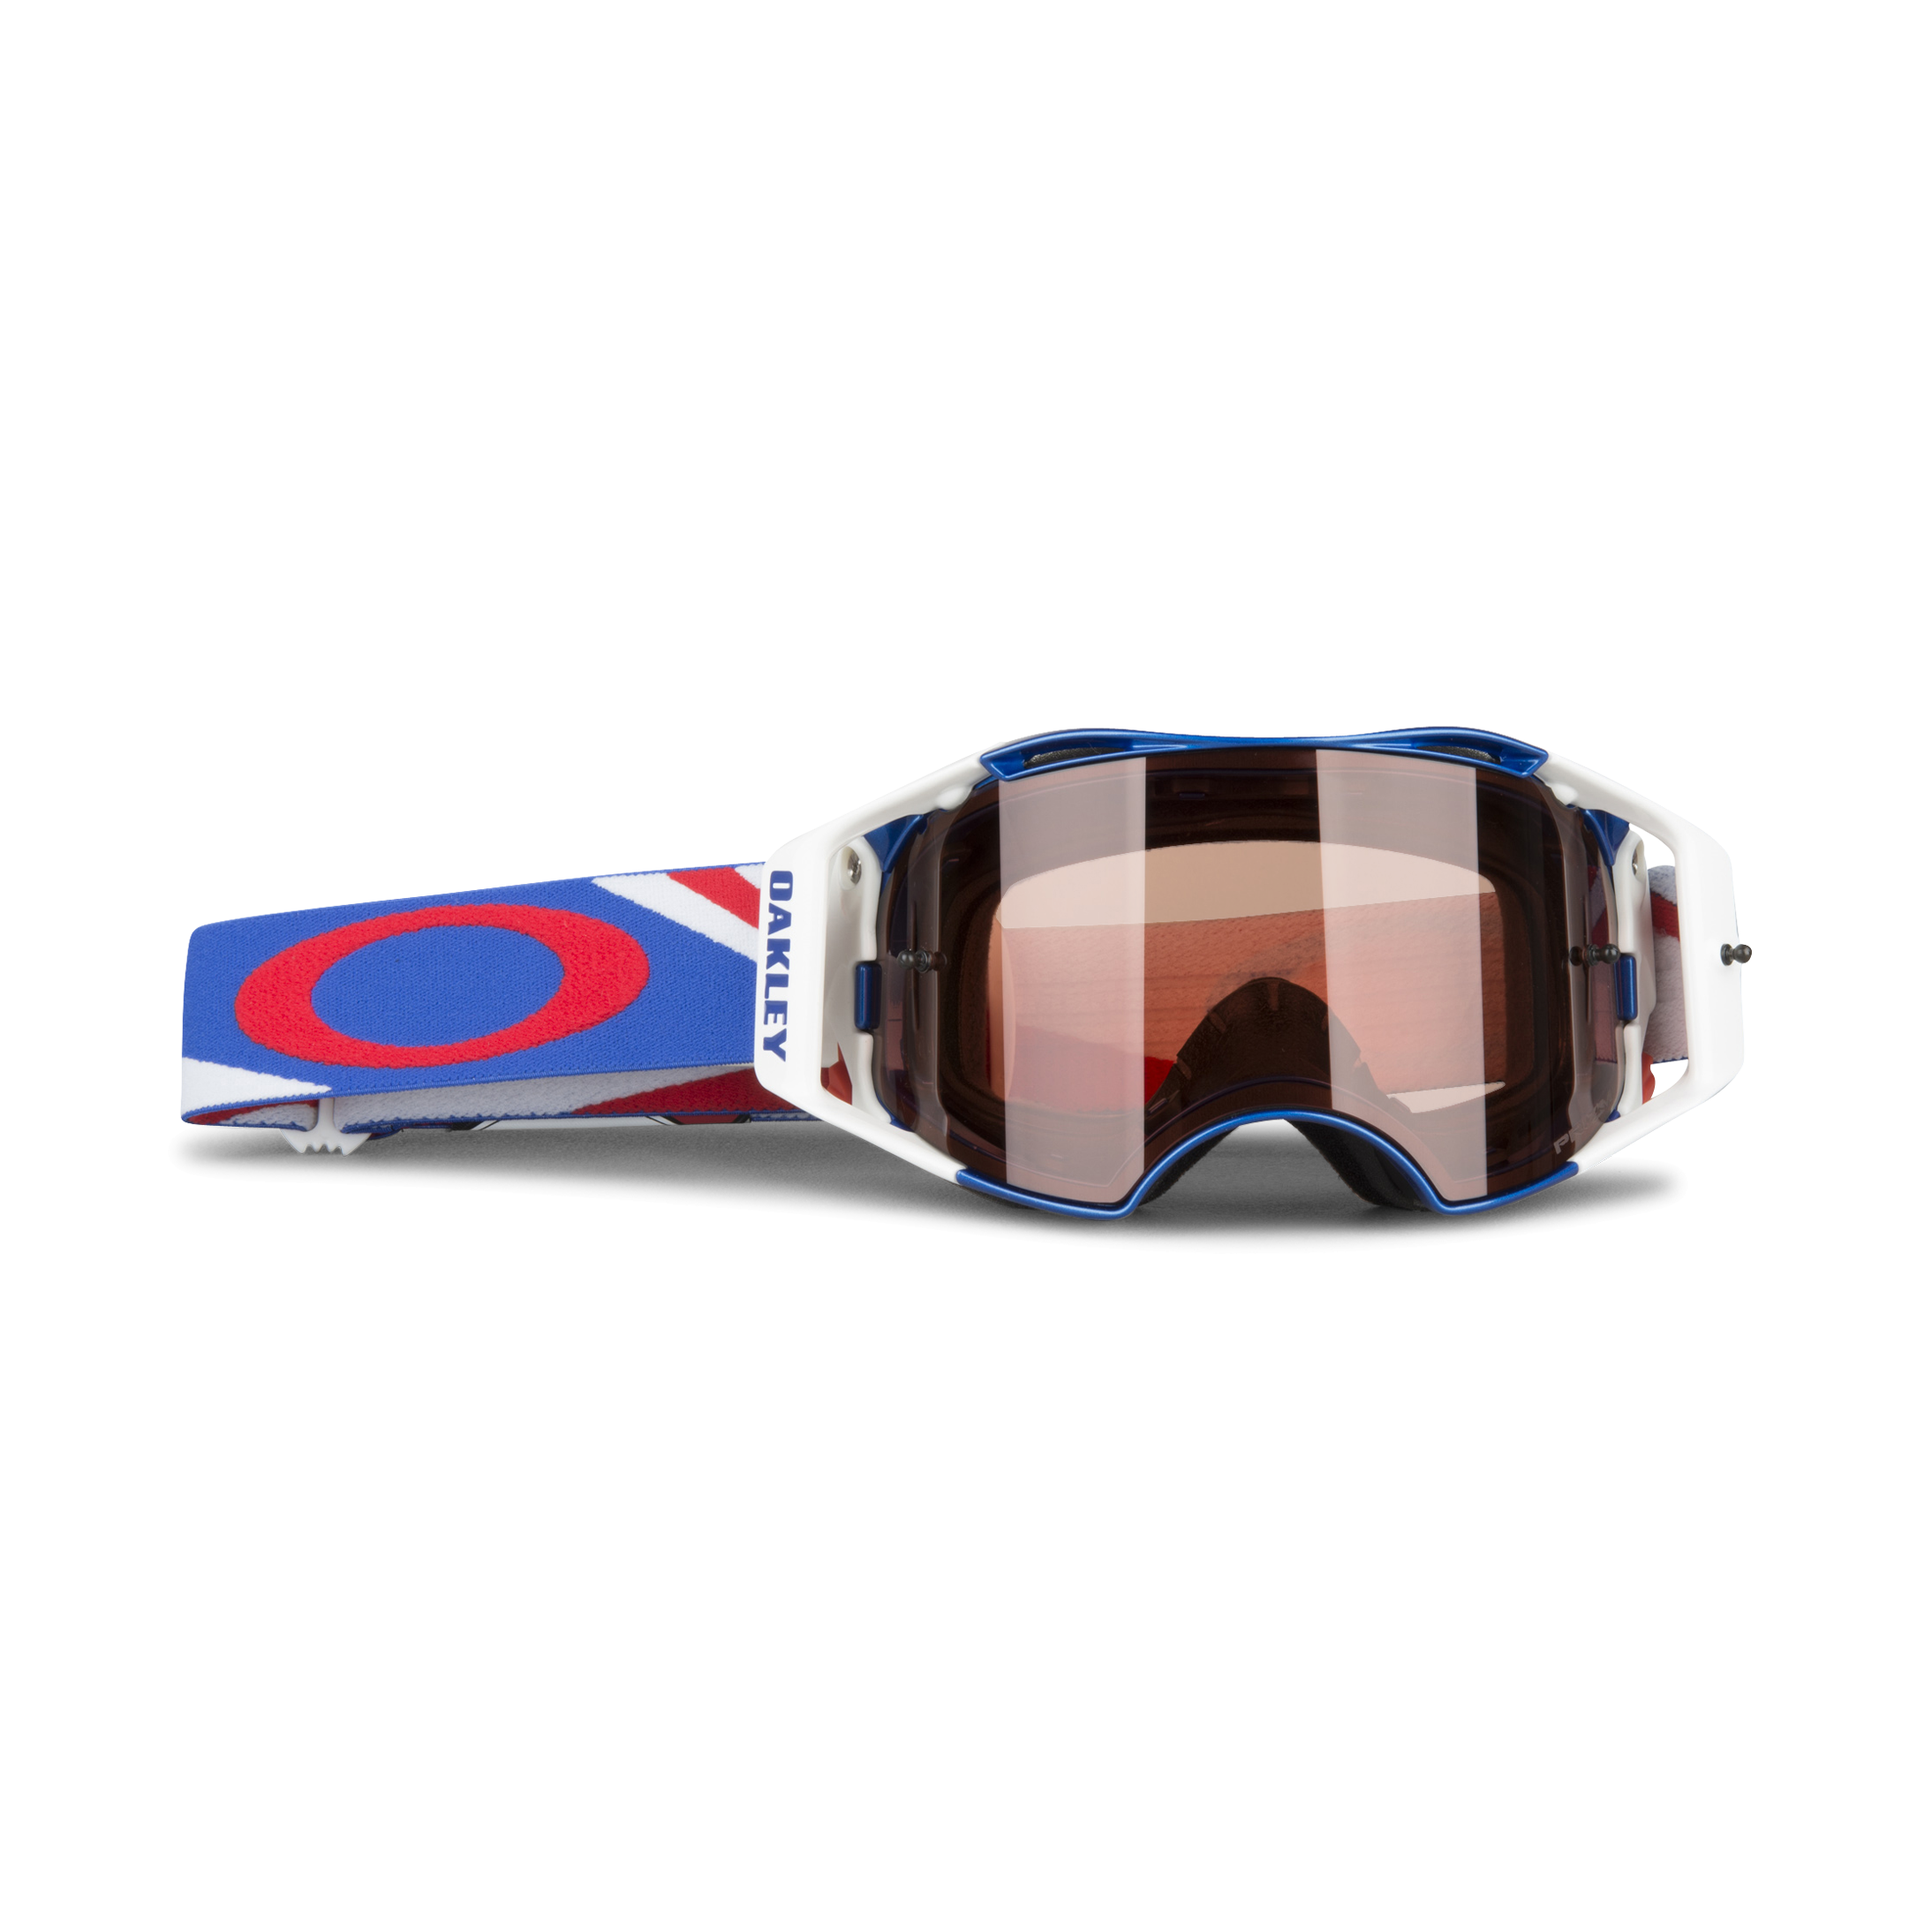 red and blue oakley sunglasses